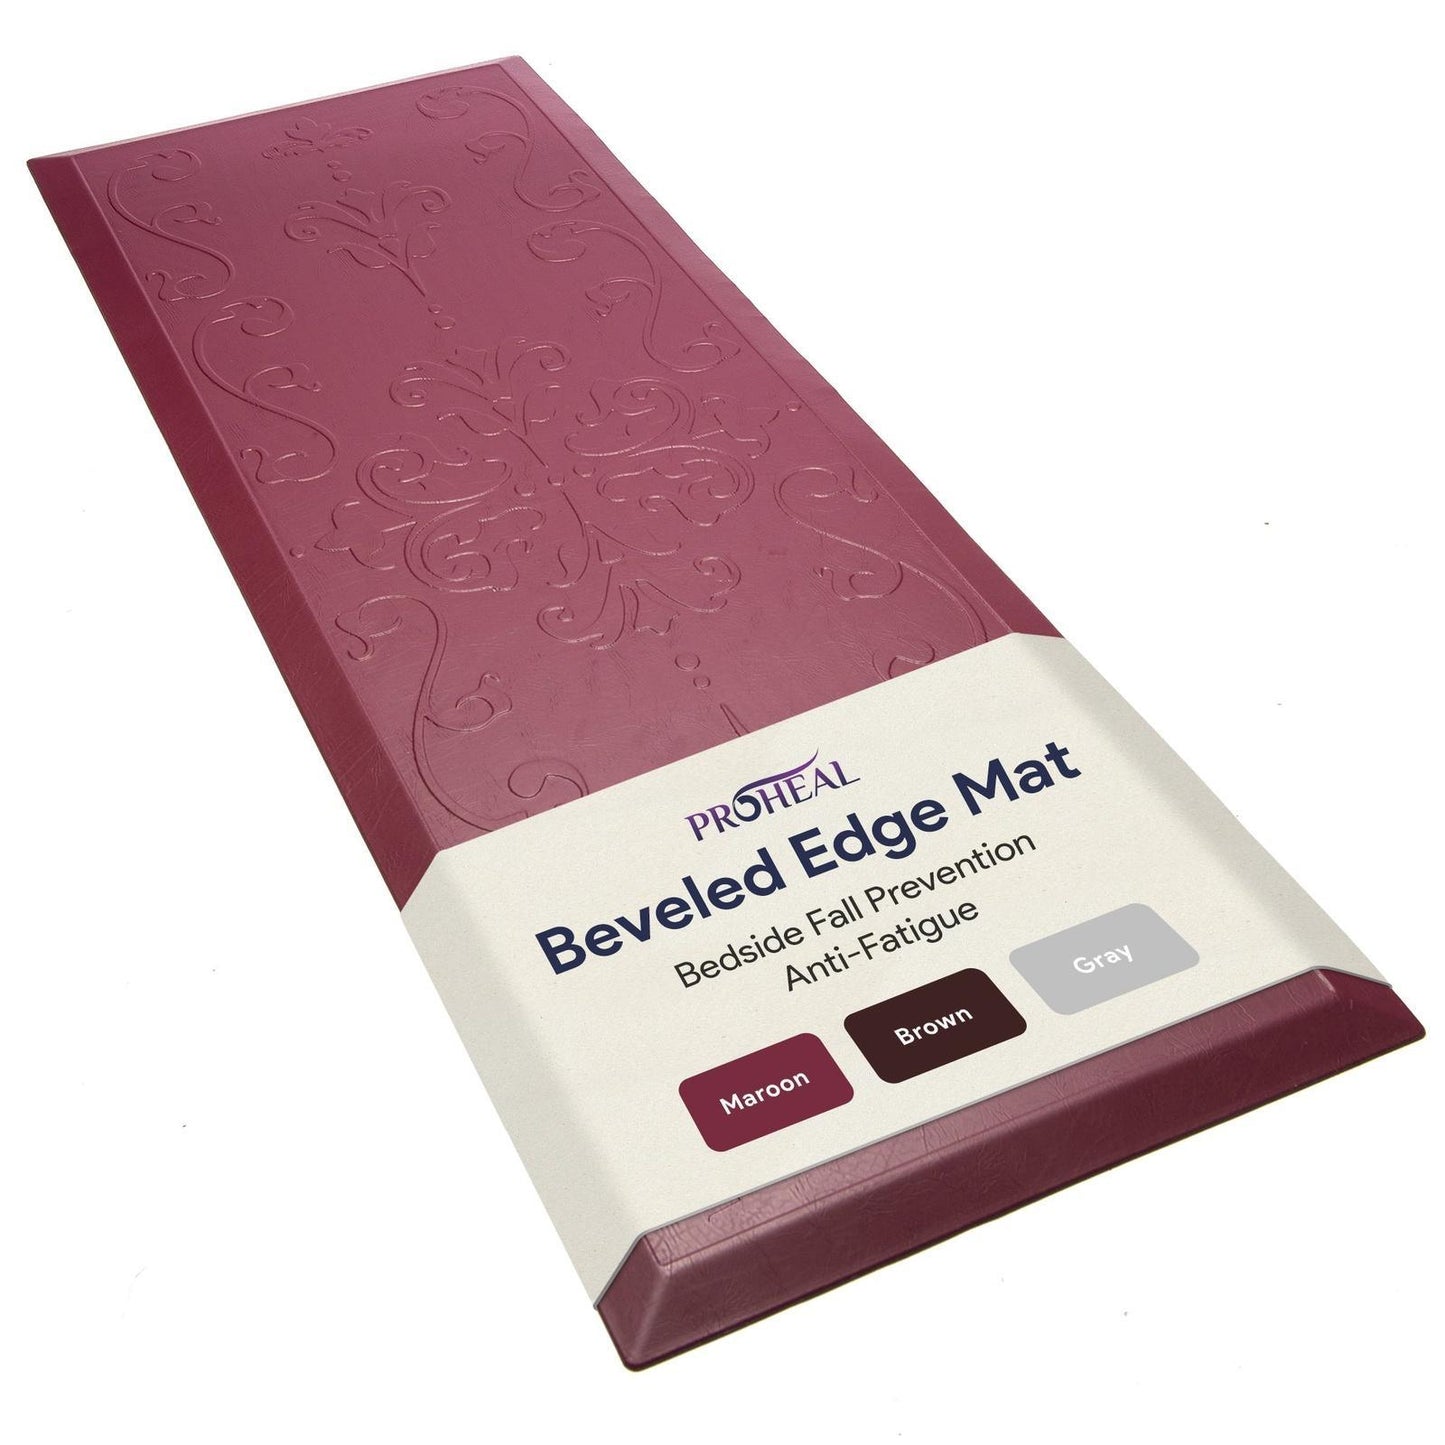 Beveled Bedside Fall Mat for Elderly - Maroon - 4 Pack ProHeal